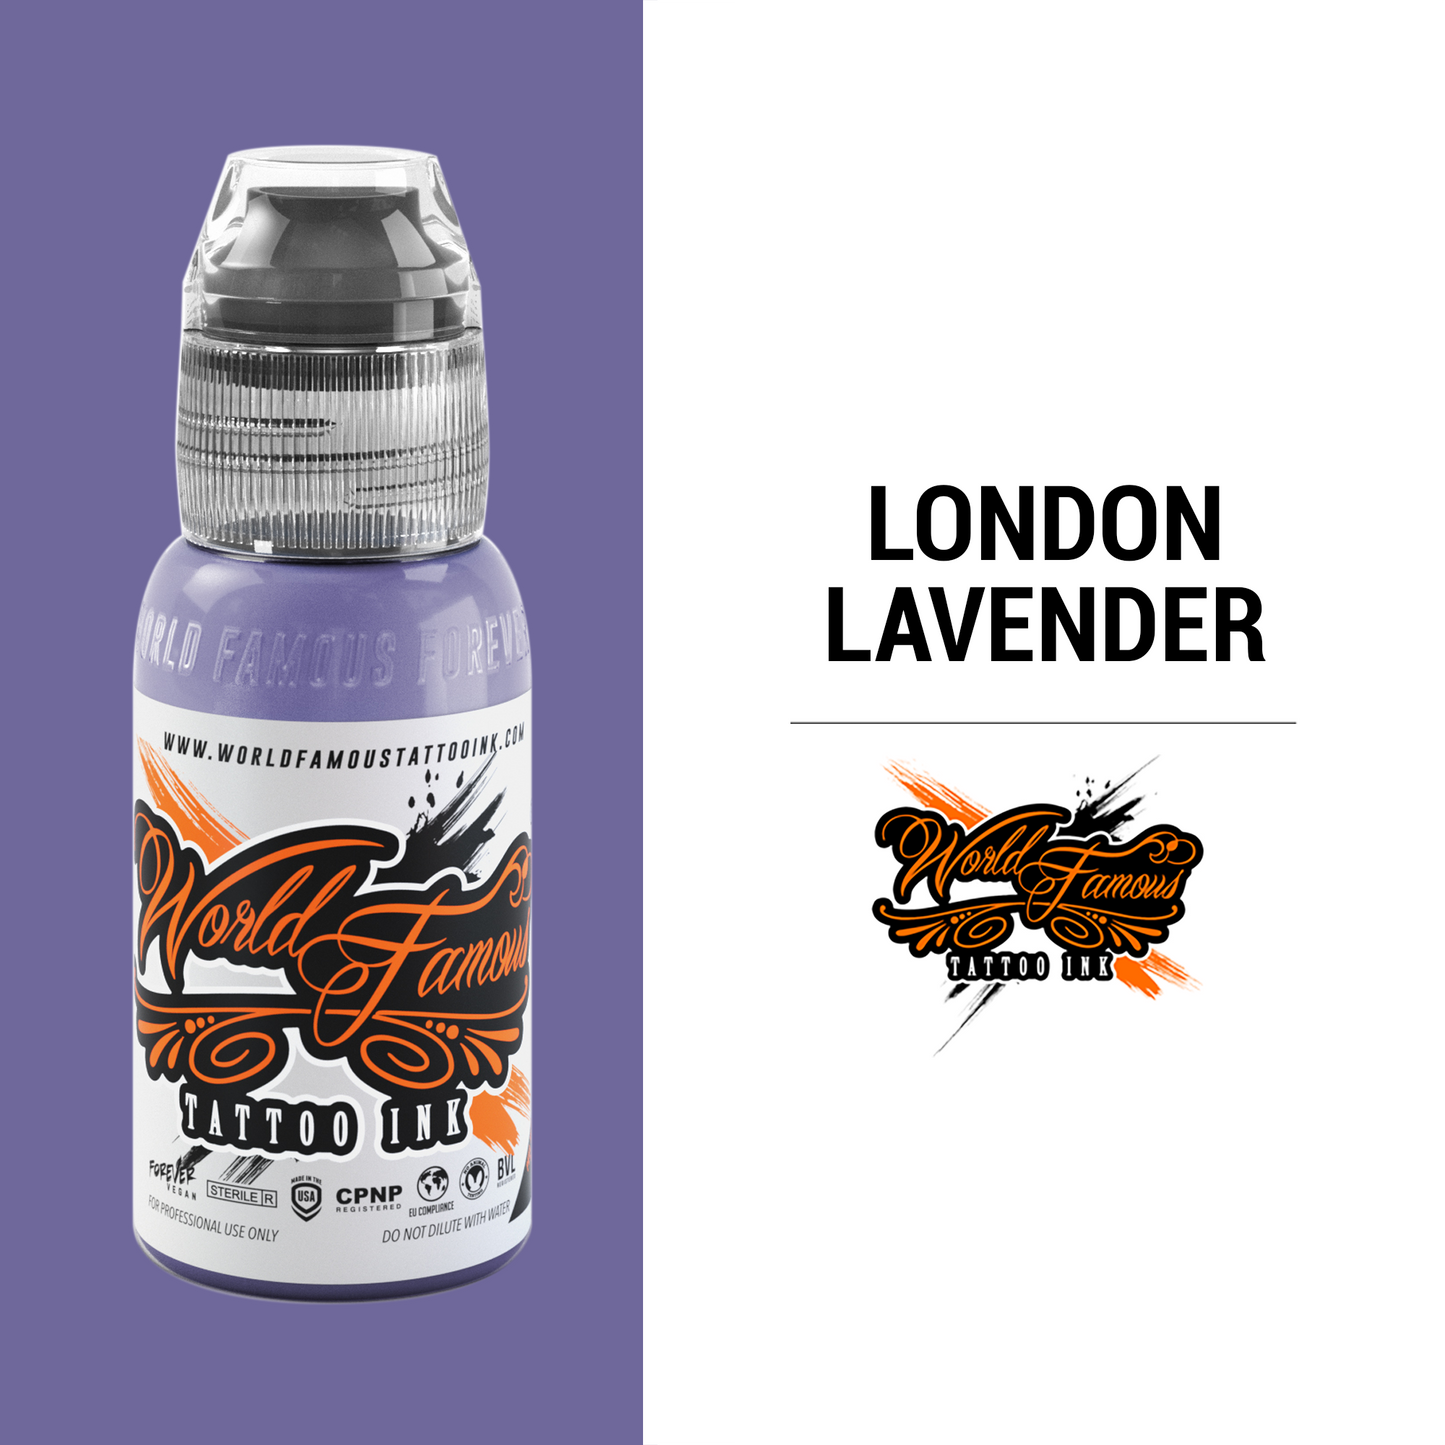 London Lavender | World Famous Tattoo Ink